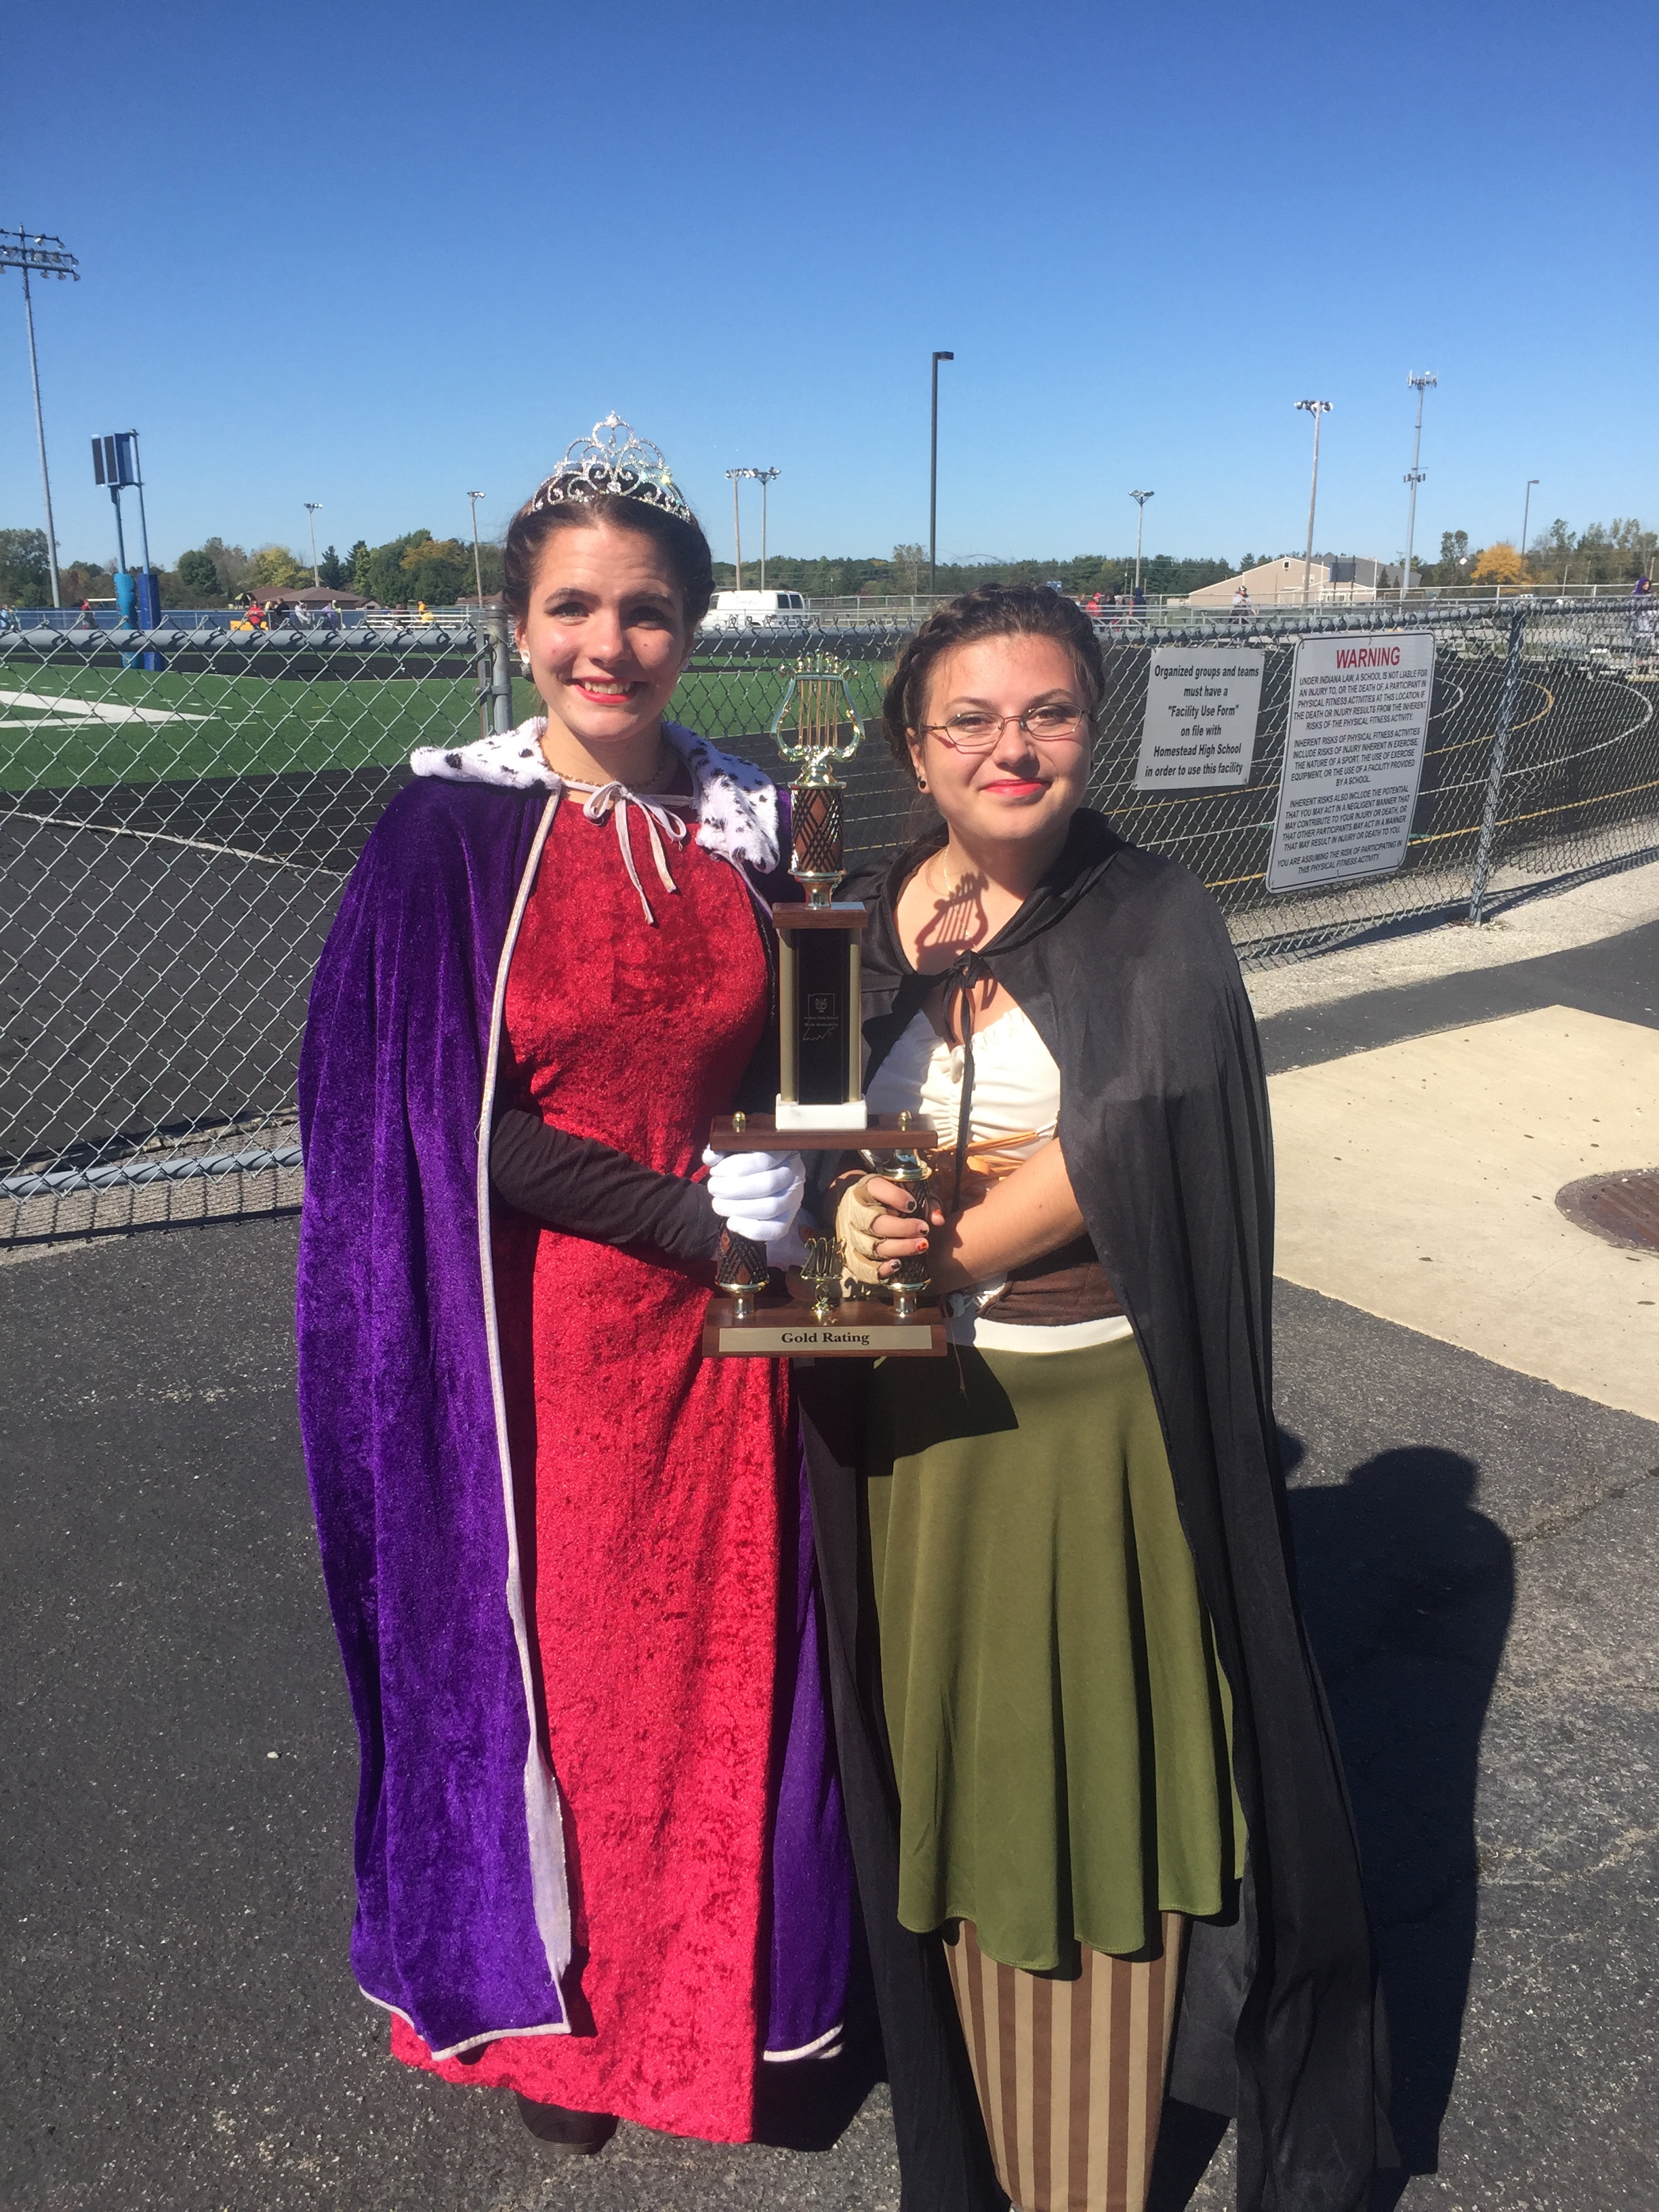 Pictured with the contest trophy are Montana Golden, drum major and Allie Ogle.